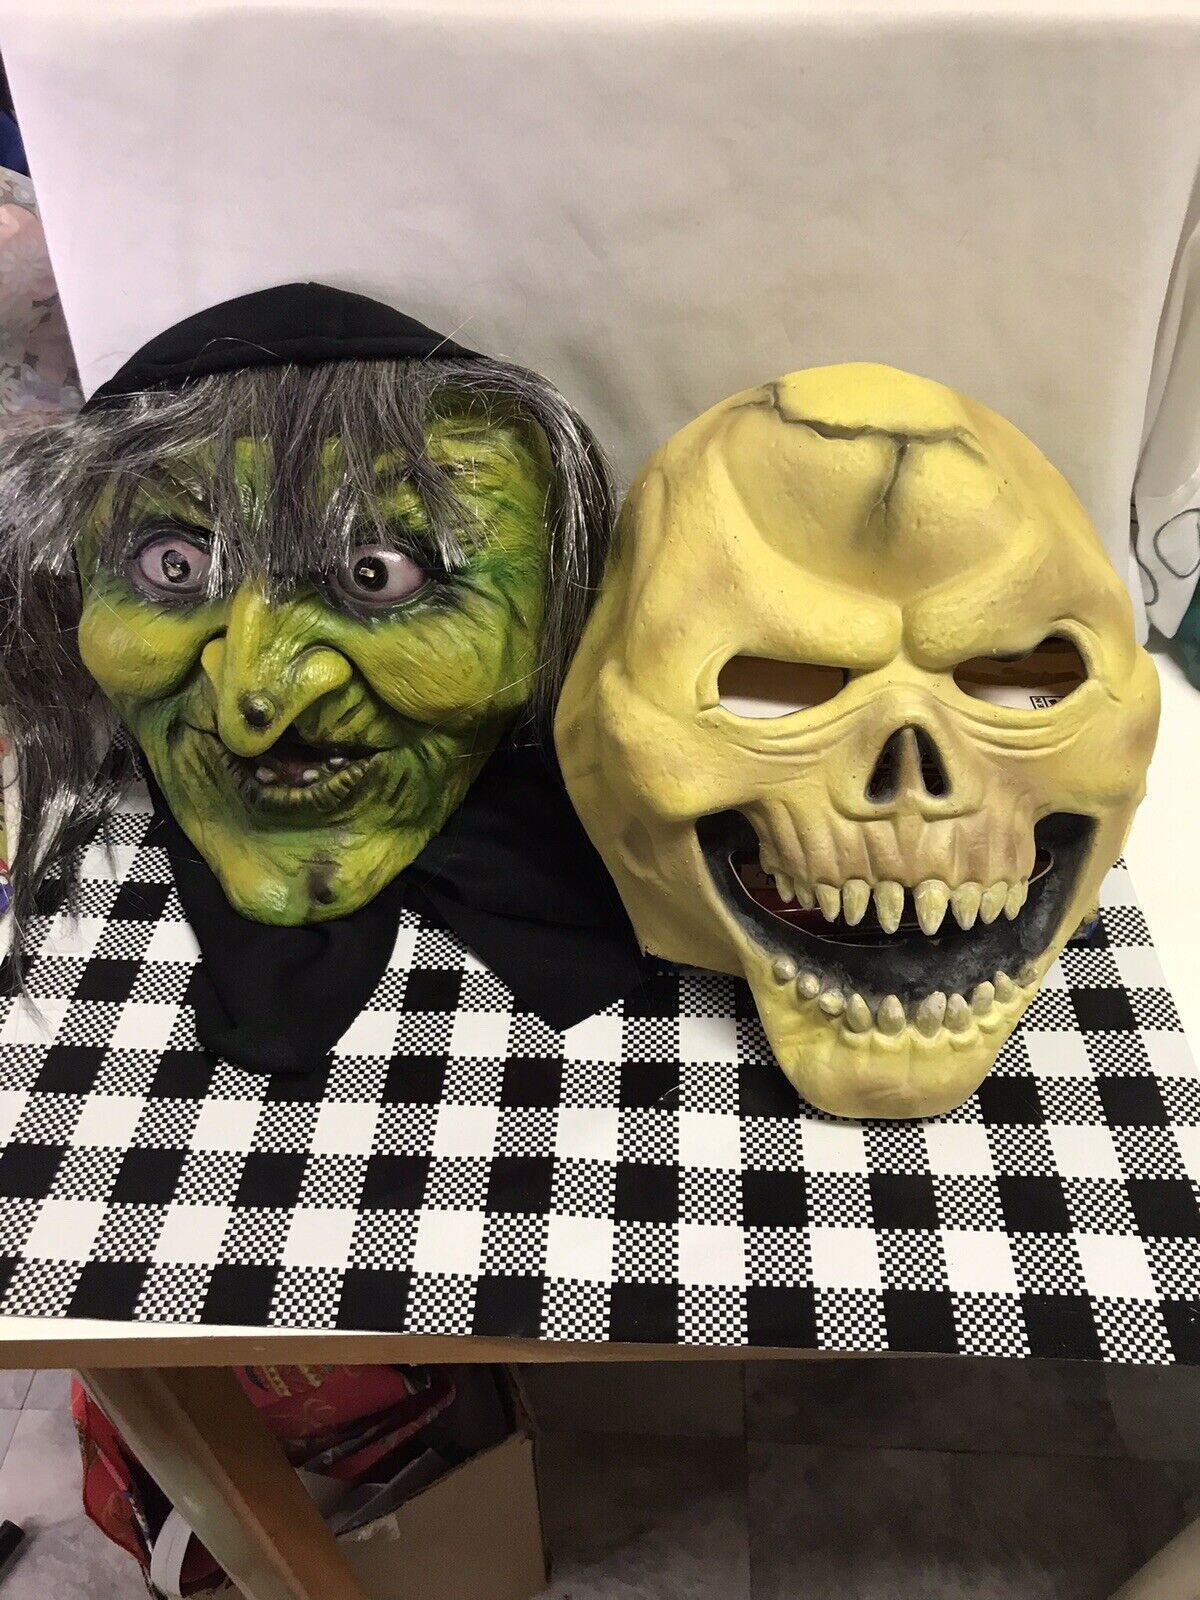 Lot of two vintage Masks Skull reaper Lighted eyes Witch Hag Adult Halloween